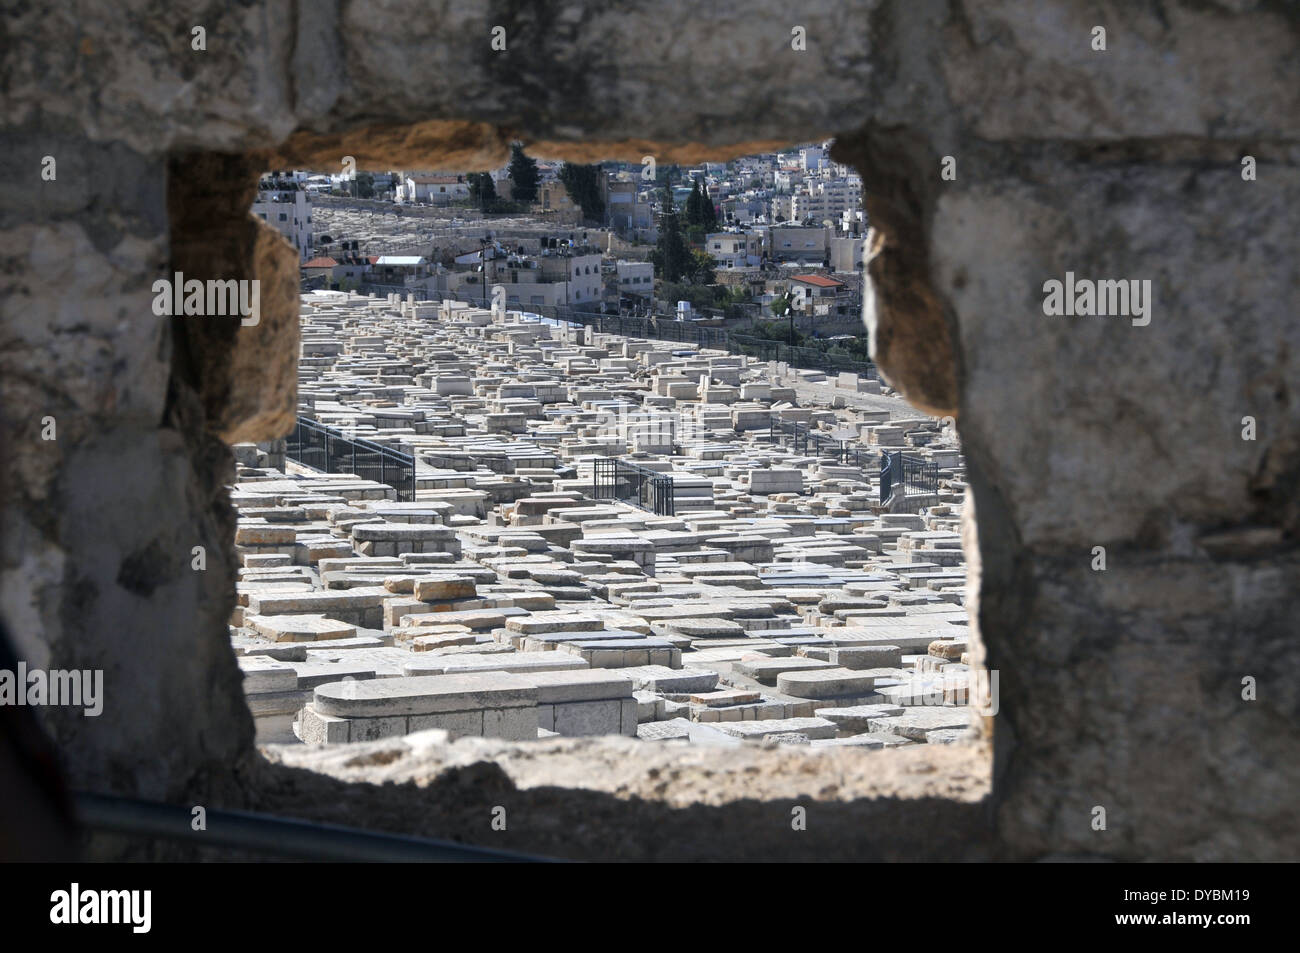 View of tombs in the Jewish cemetery of the Mount of Olives, Jerusalem, Israel Stock Photo